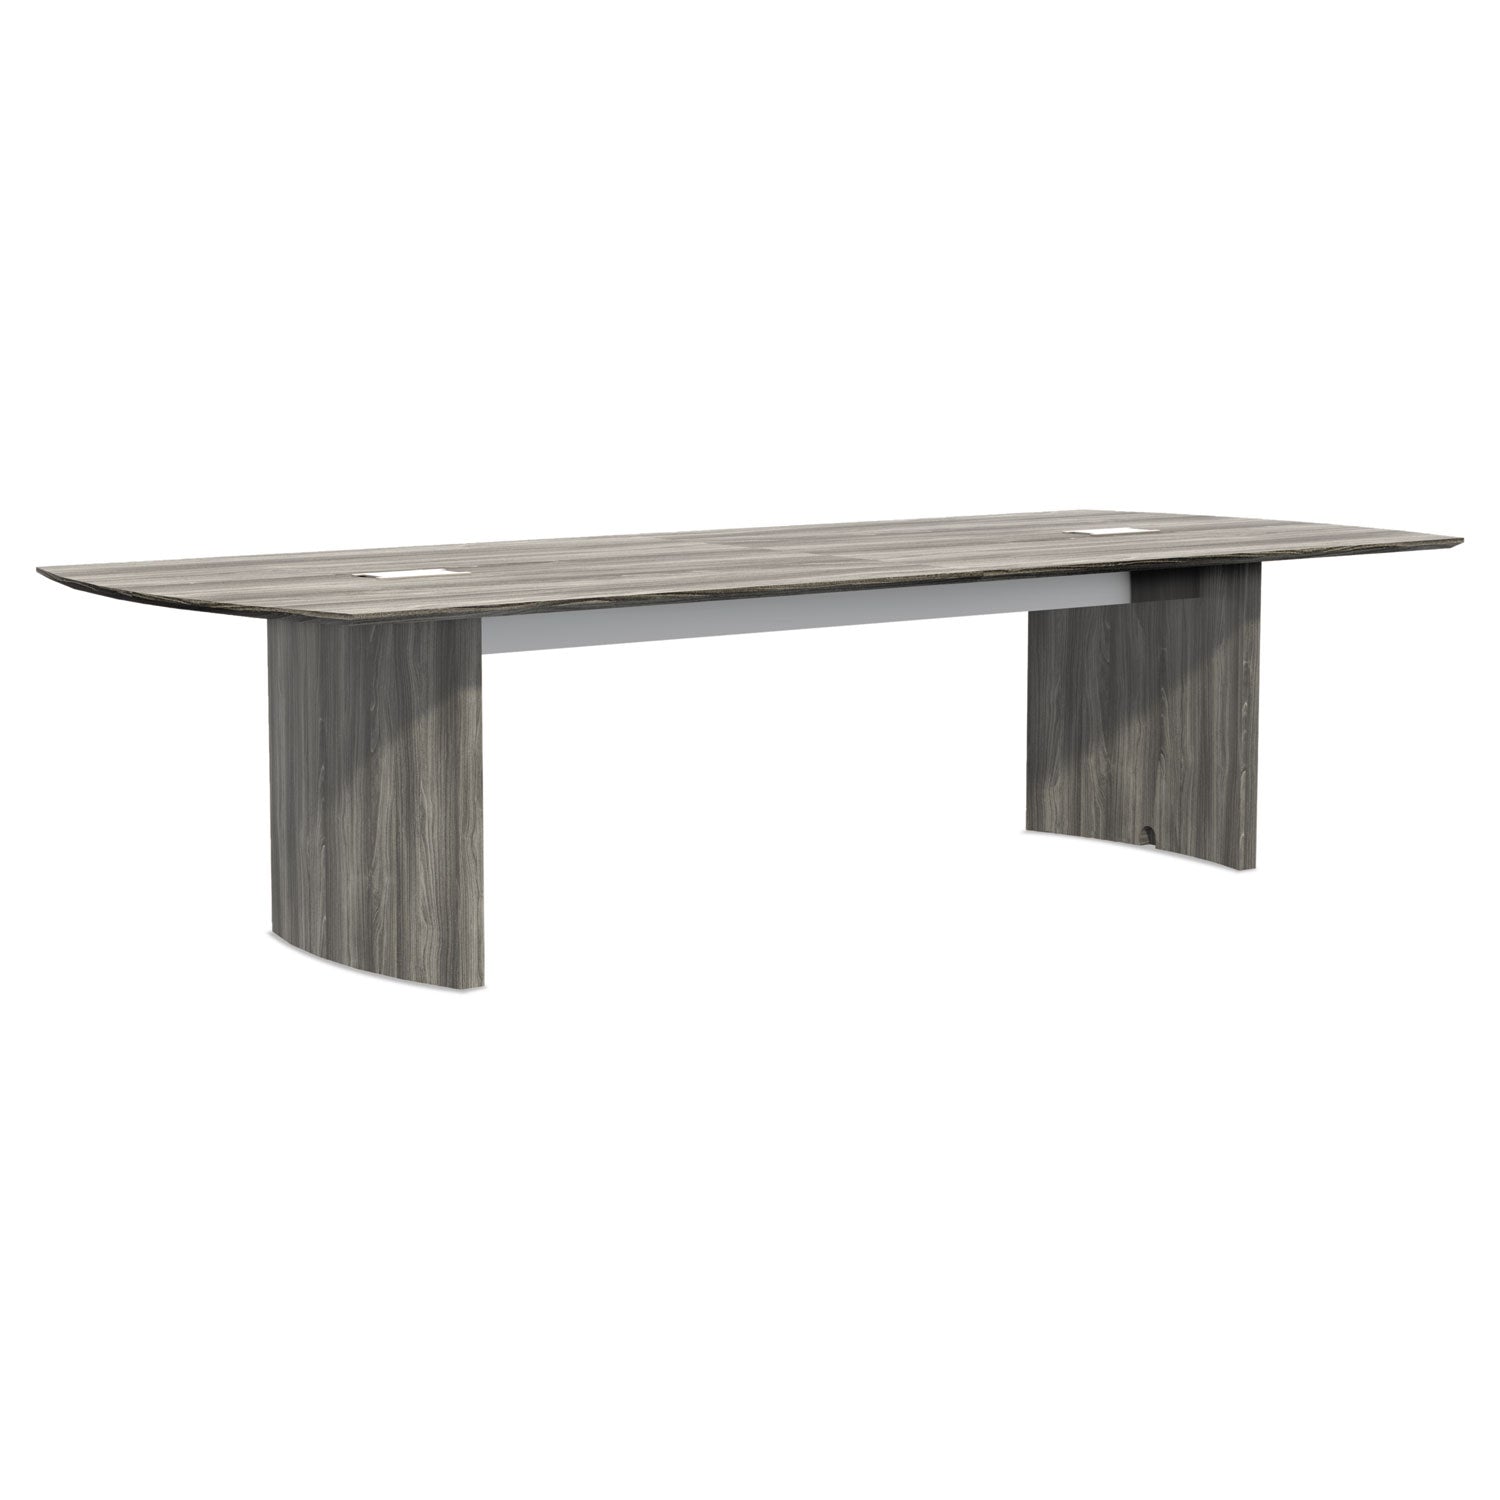 Medina Series Conference Table Modesty Panels, 82.5w x 0.63d x 11.8h, Gray Steel - 